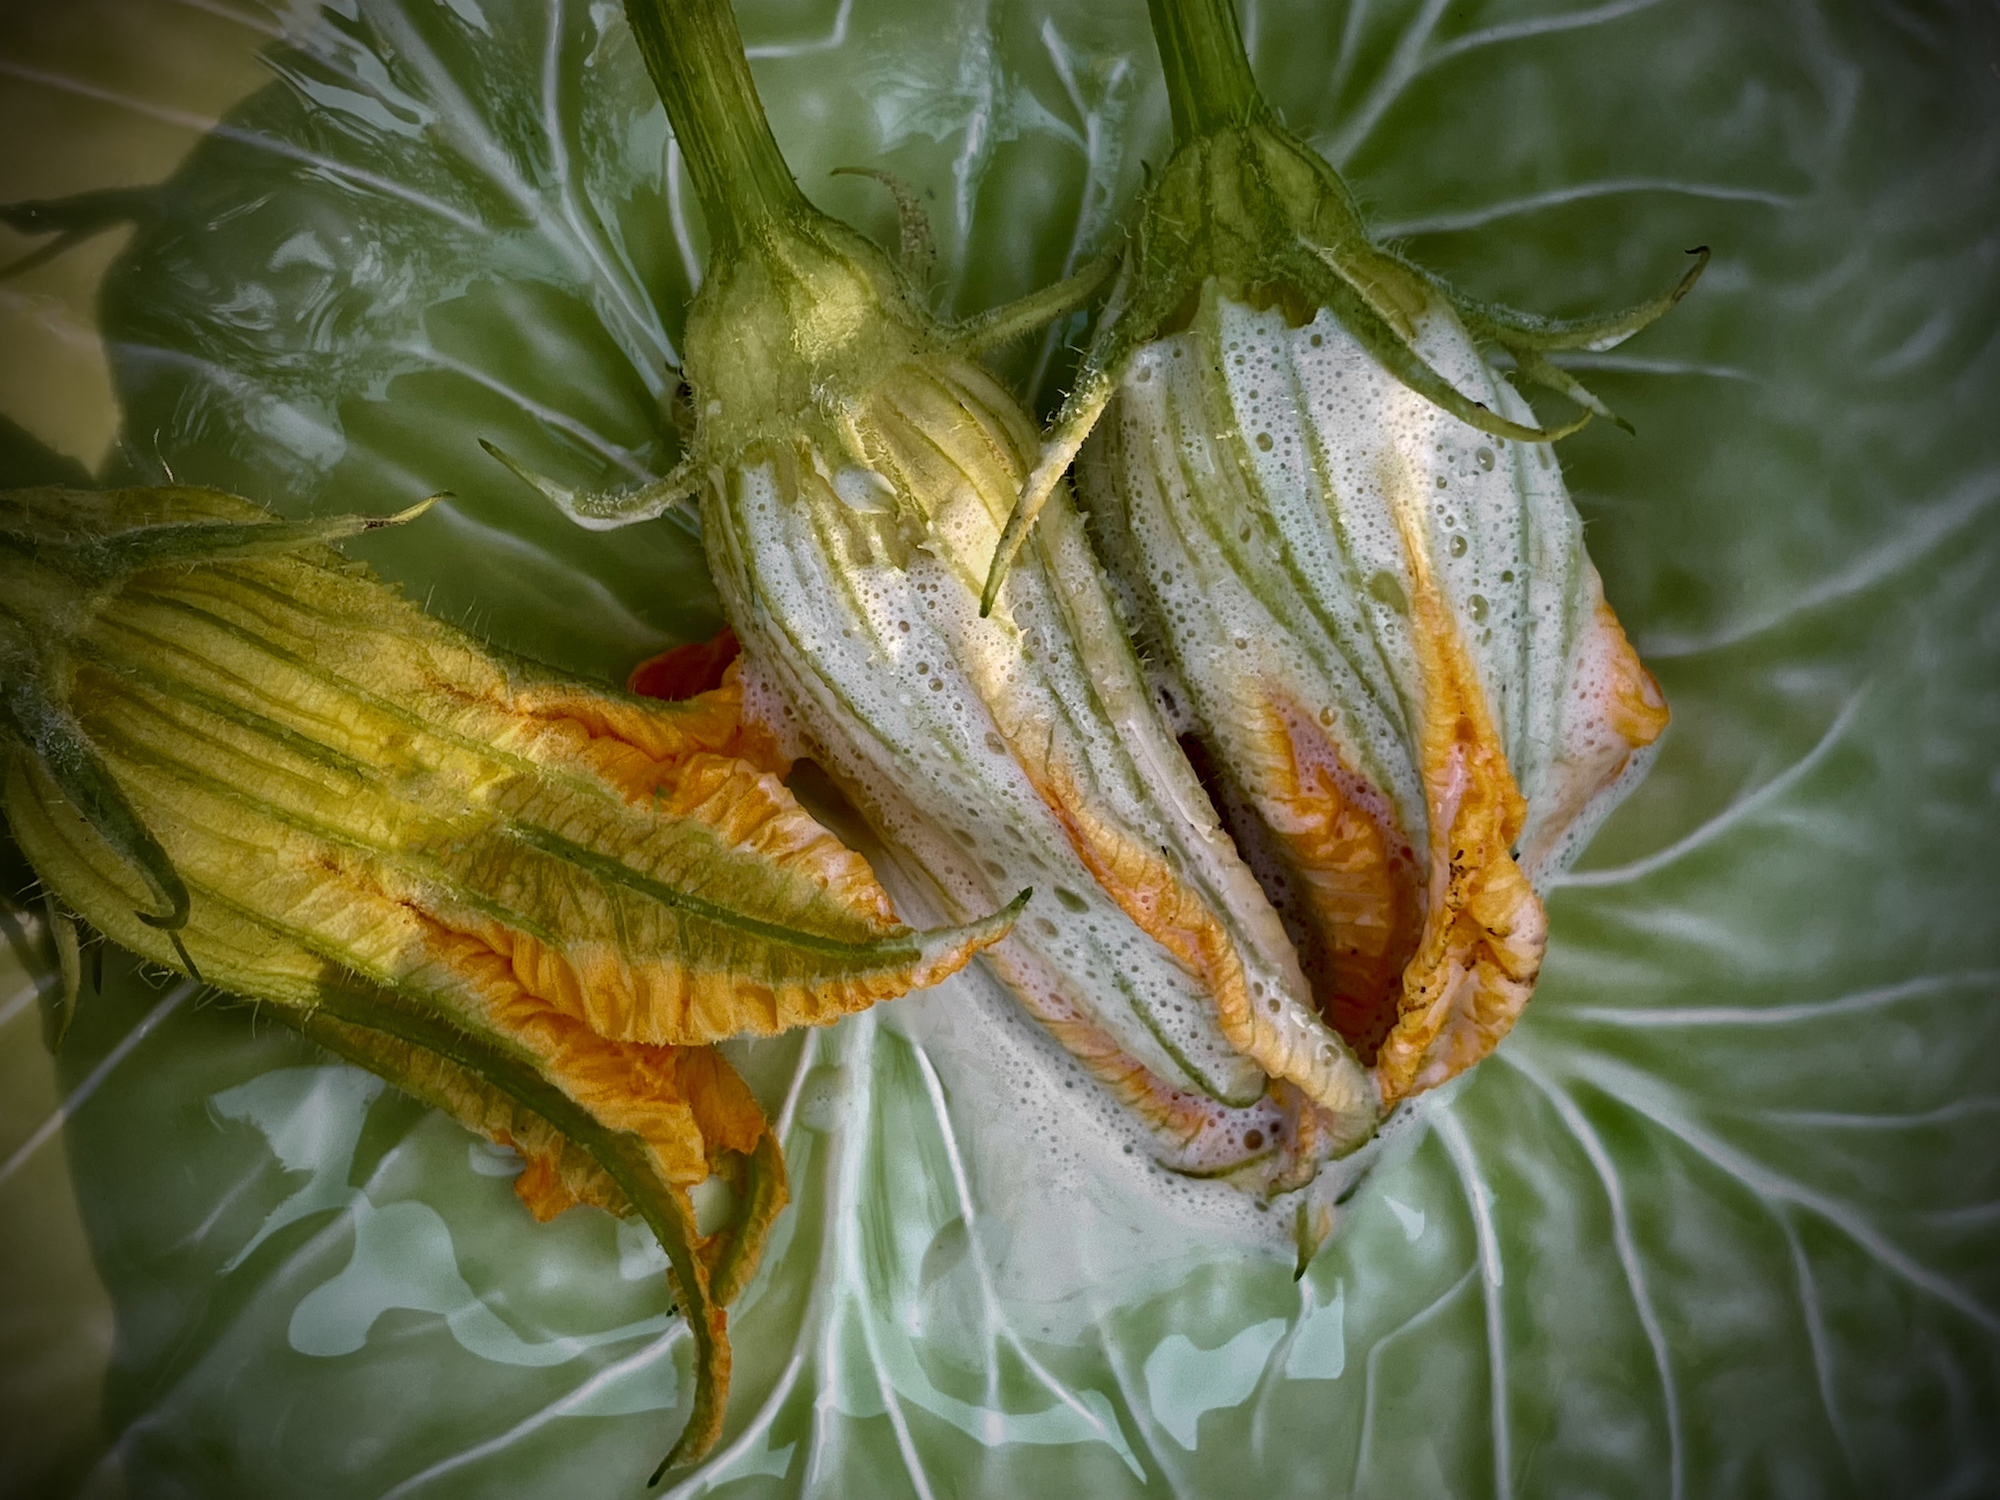 Courgette flowers with batter